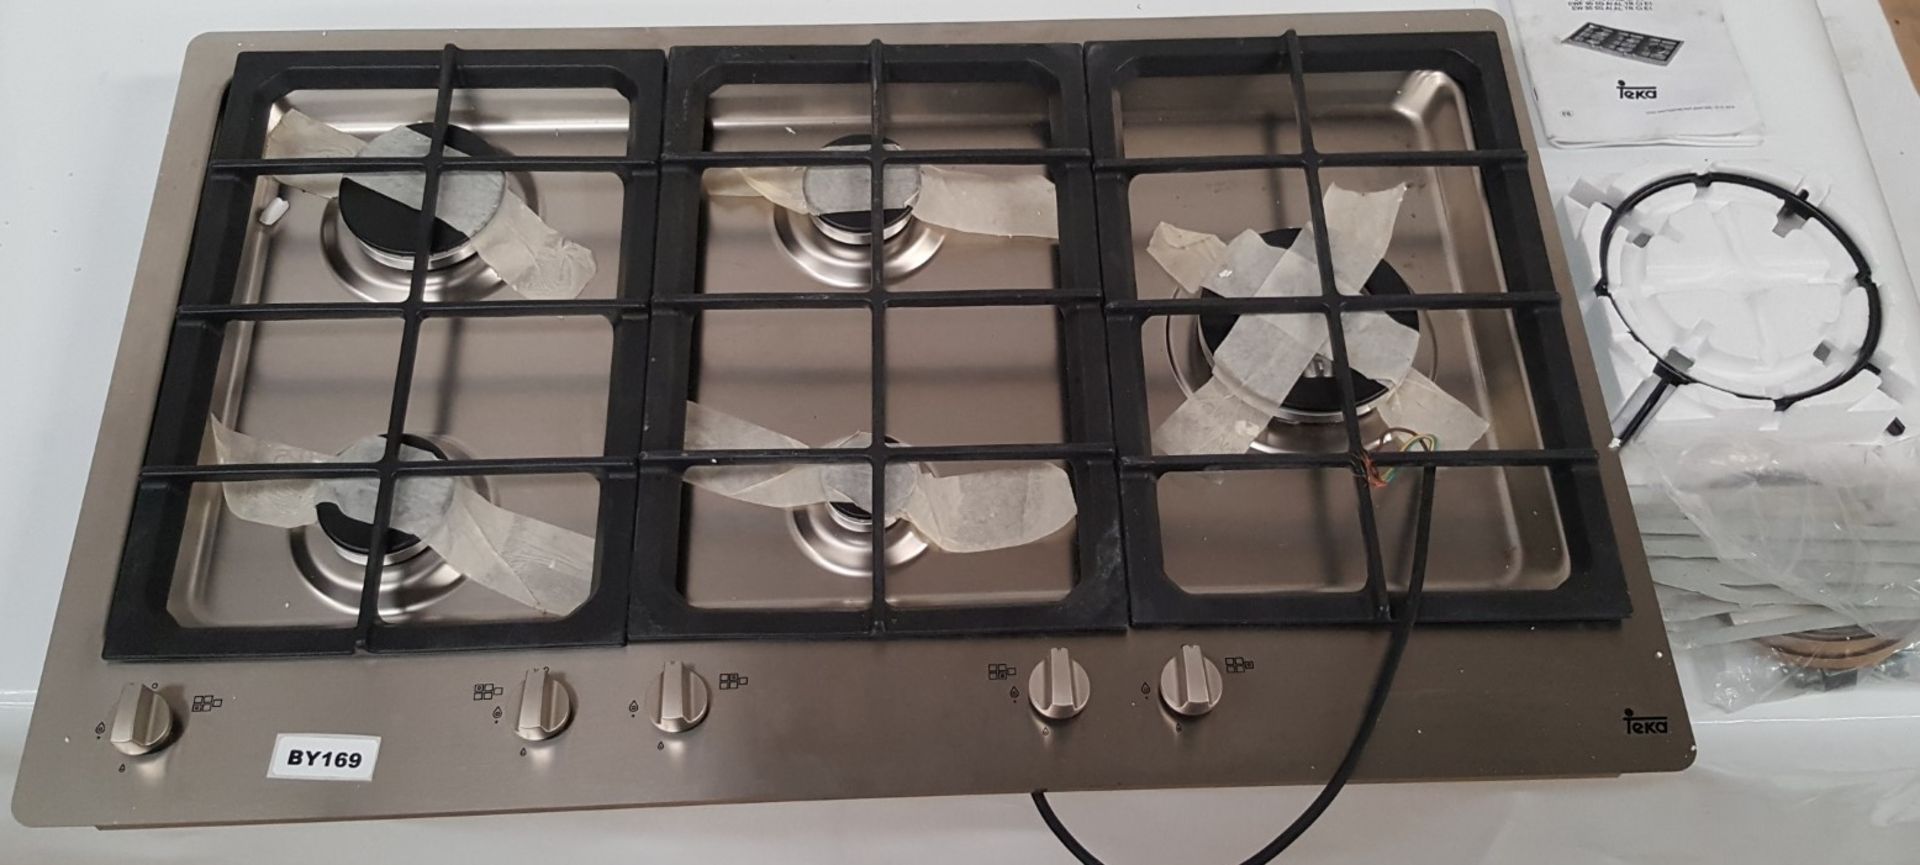 1 x TEKA 90 cm Stainless Steel Finish Gas Hob With 5 Burners - Ref BY169 - Image 2 of 3